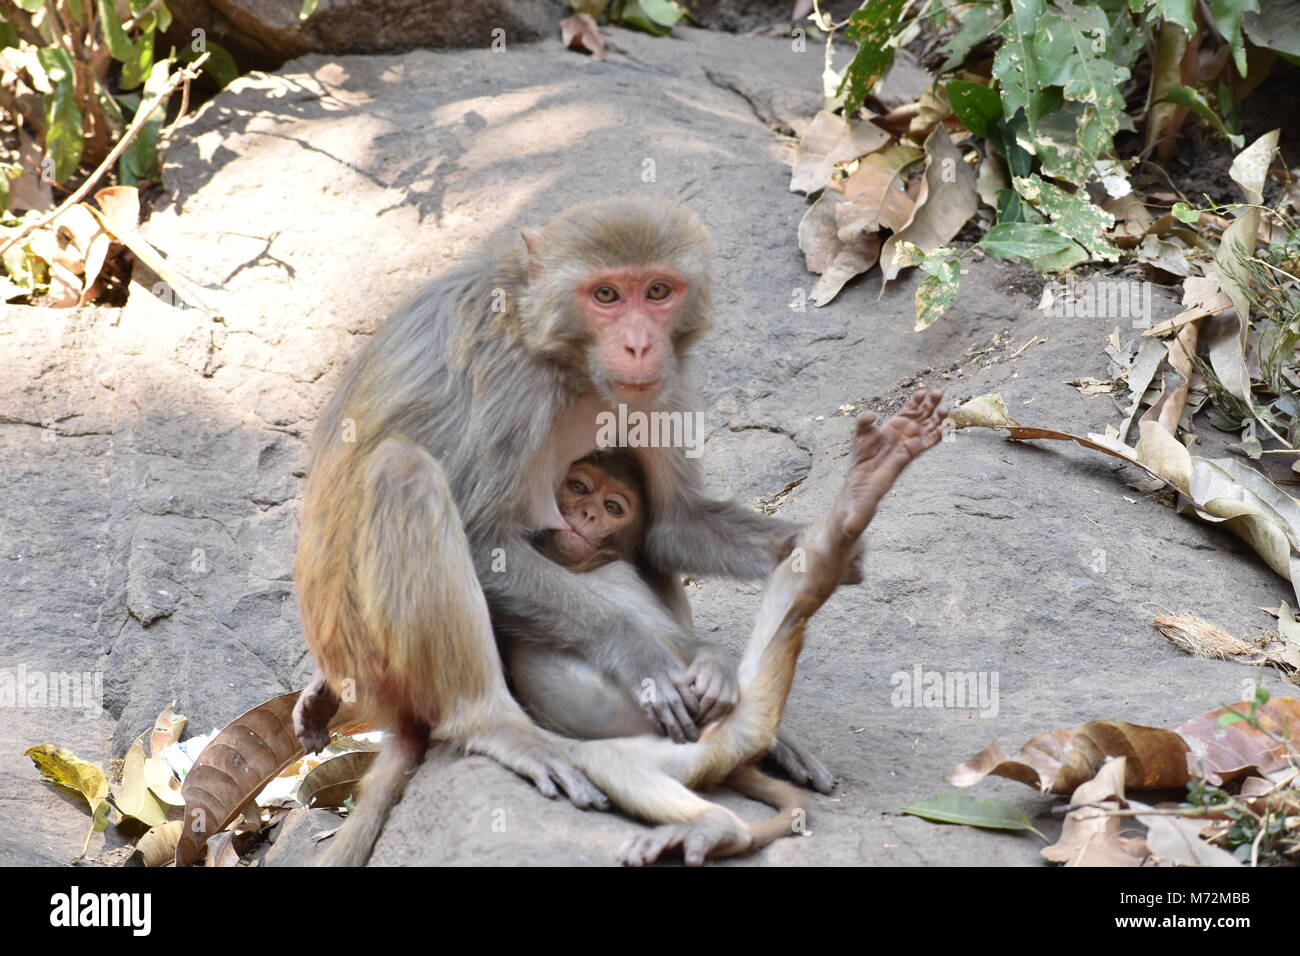 A awesome snap of monkey mother feed milk to her monkey kid in a big stone with care & love. Stock Photo